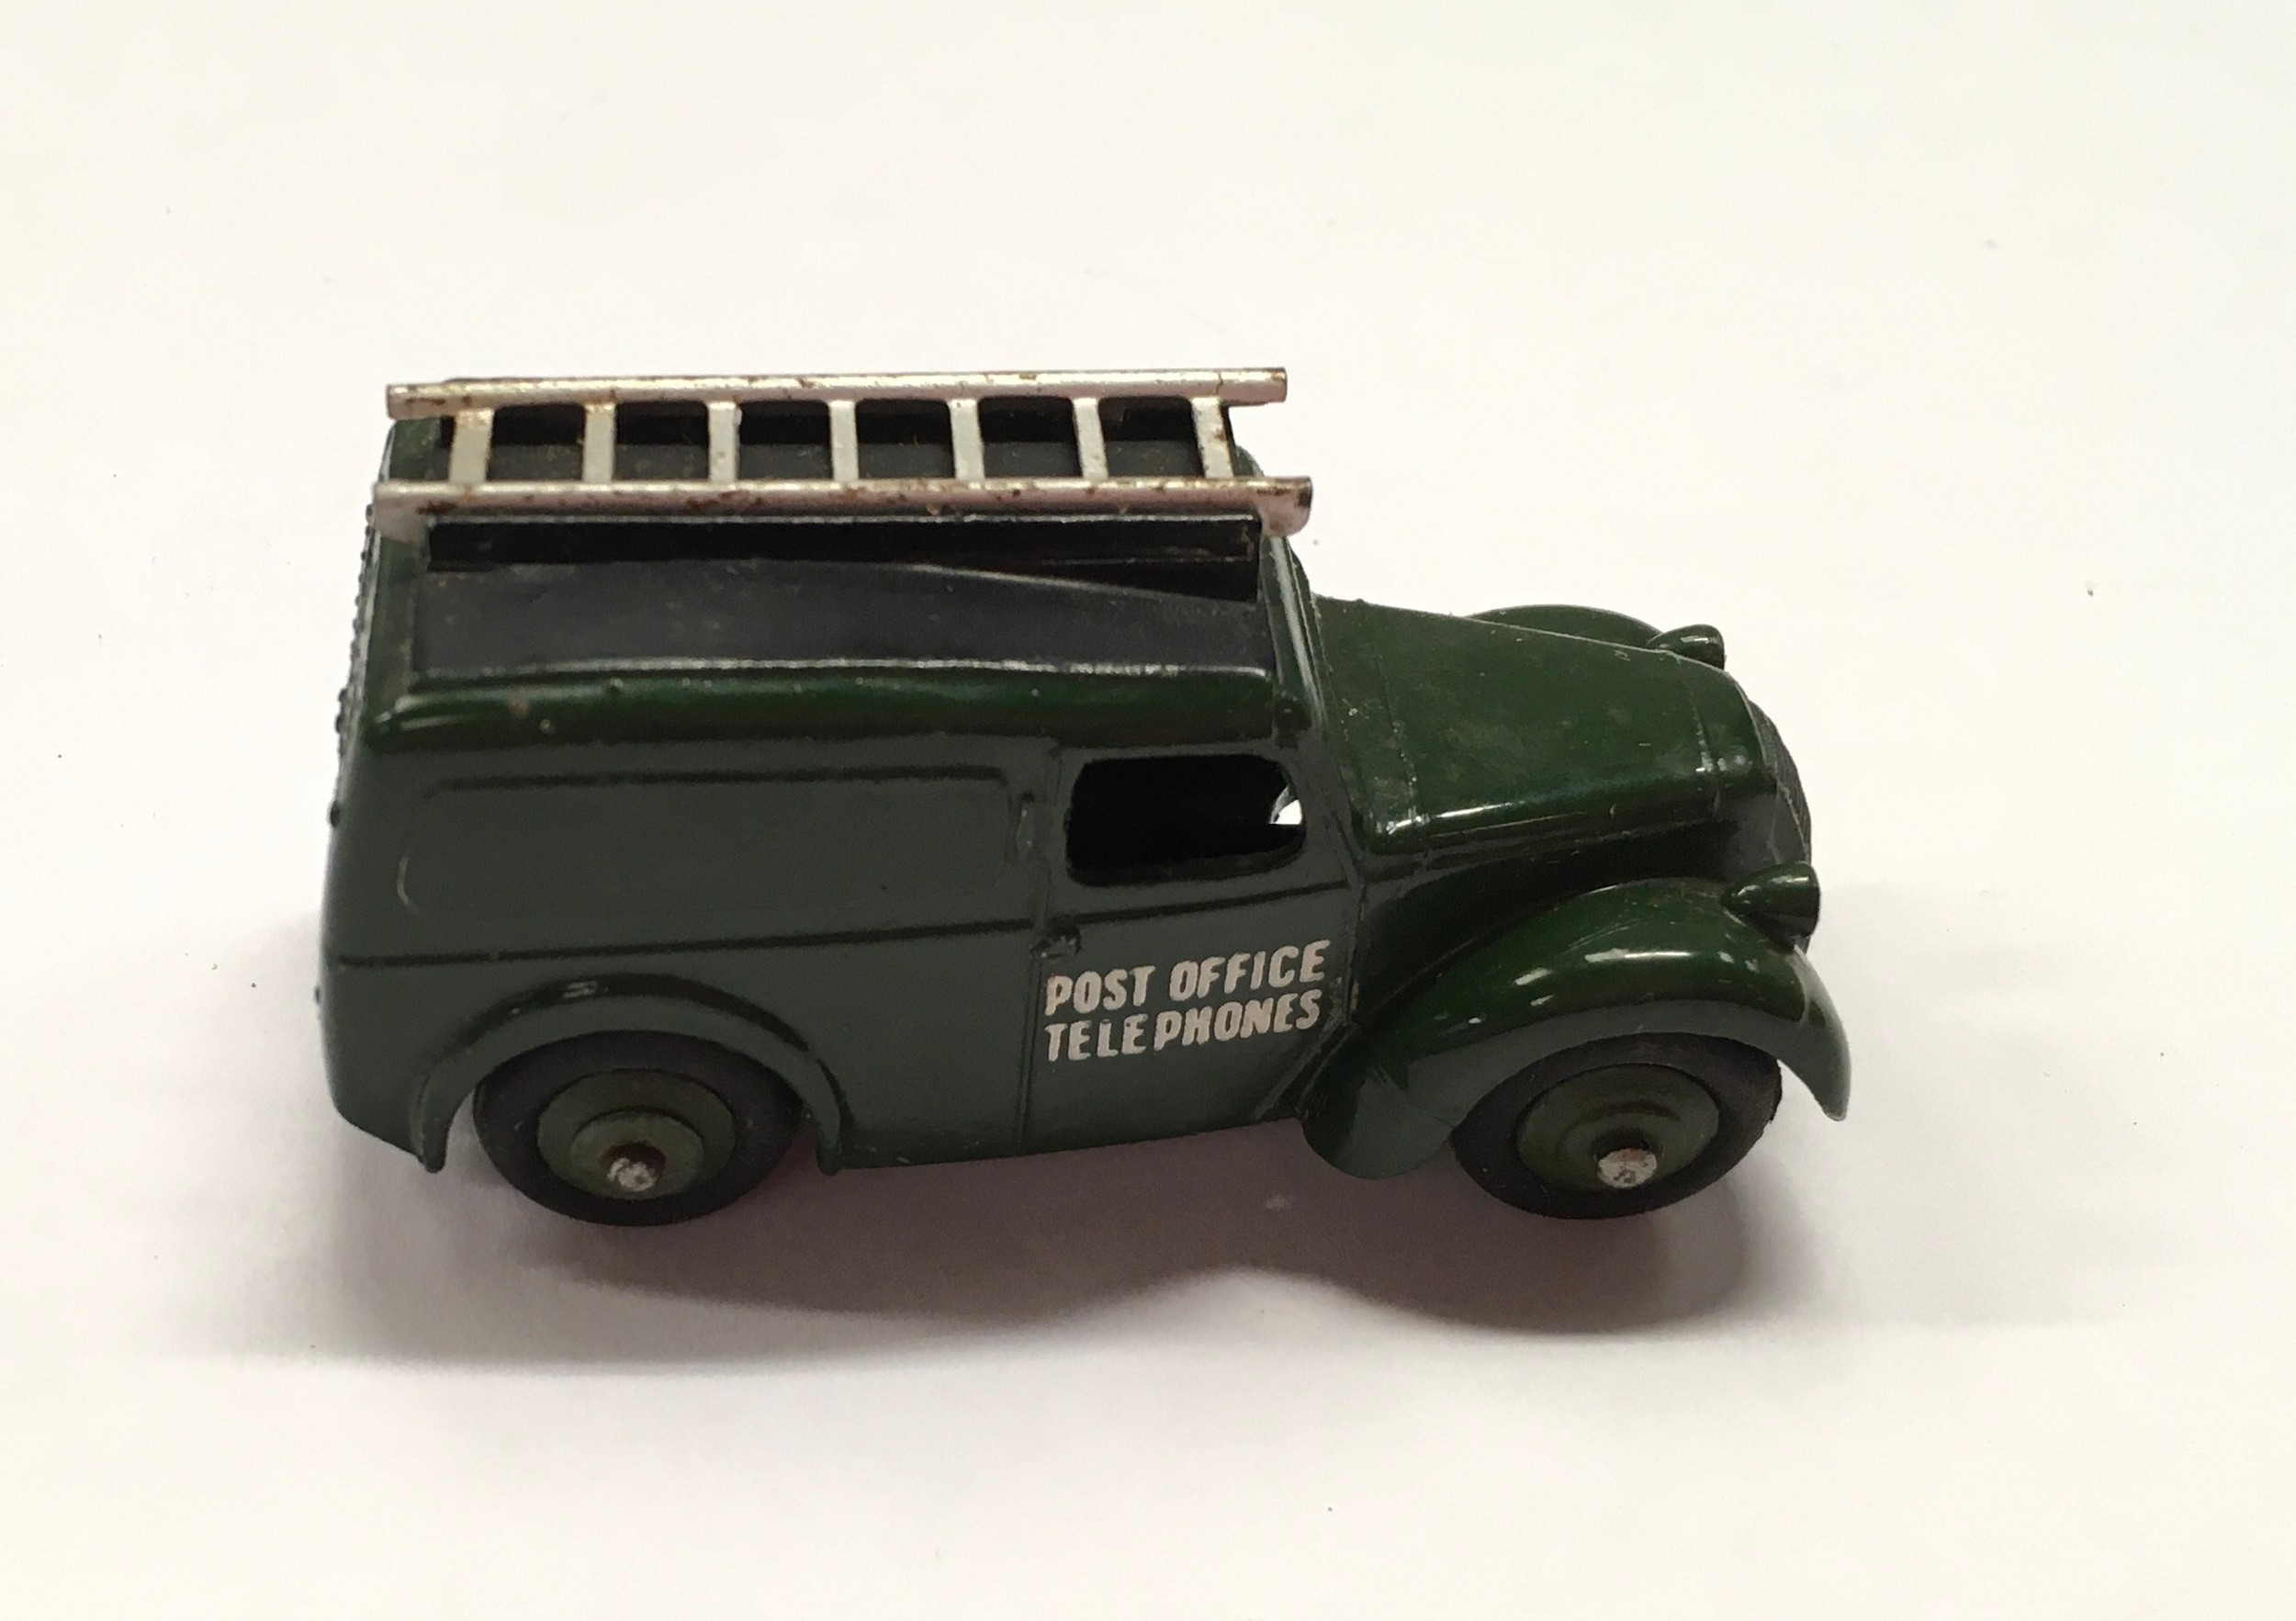 Dinky 261 Morris Telephone Service Van "Post Office Telephones" - green including ridged hubs with - Image 2 of 3